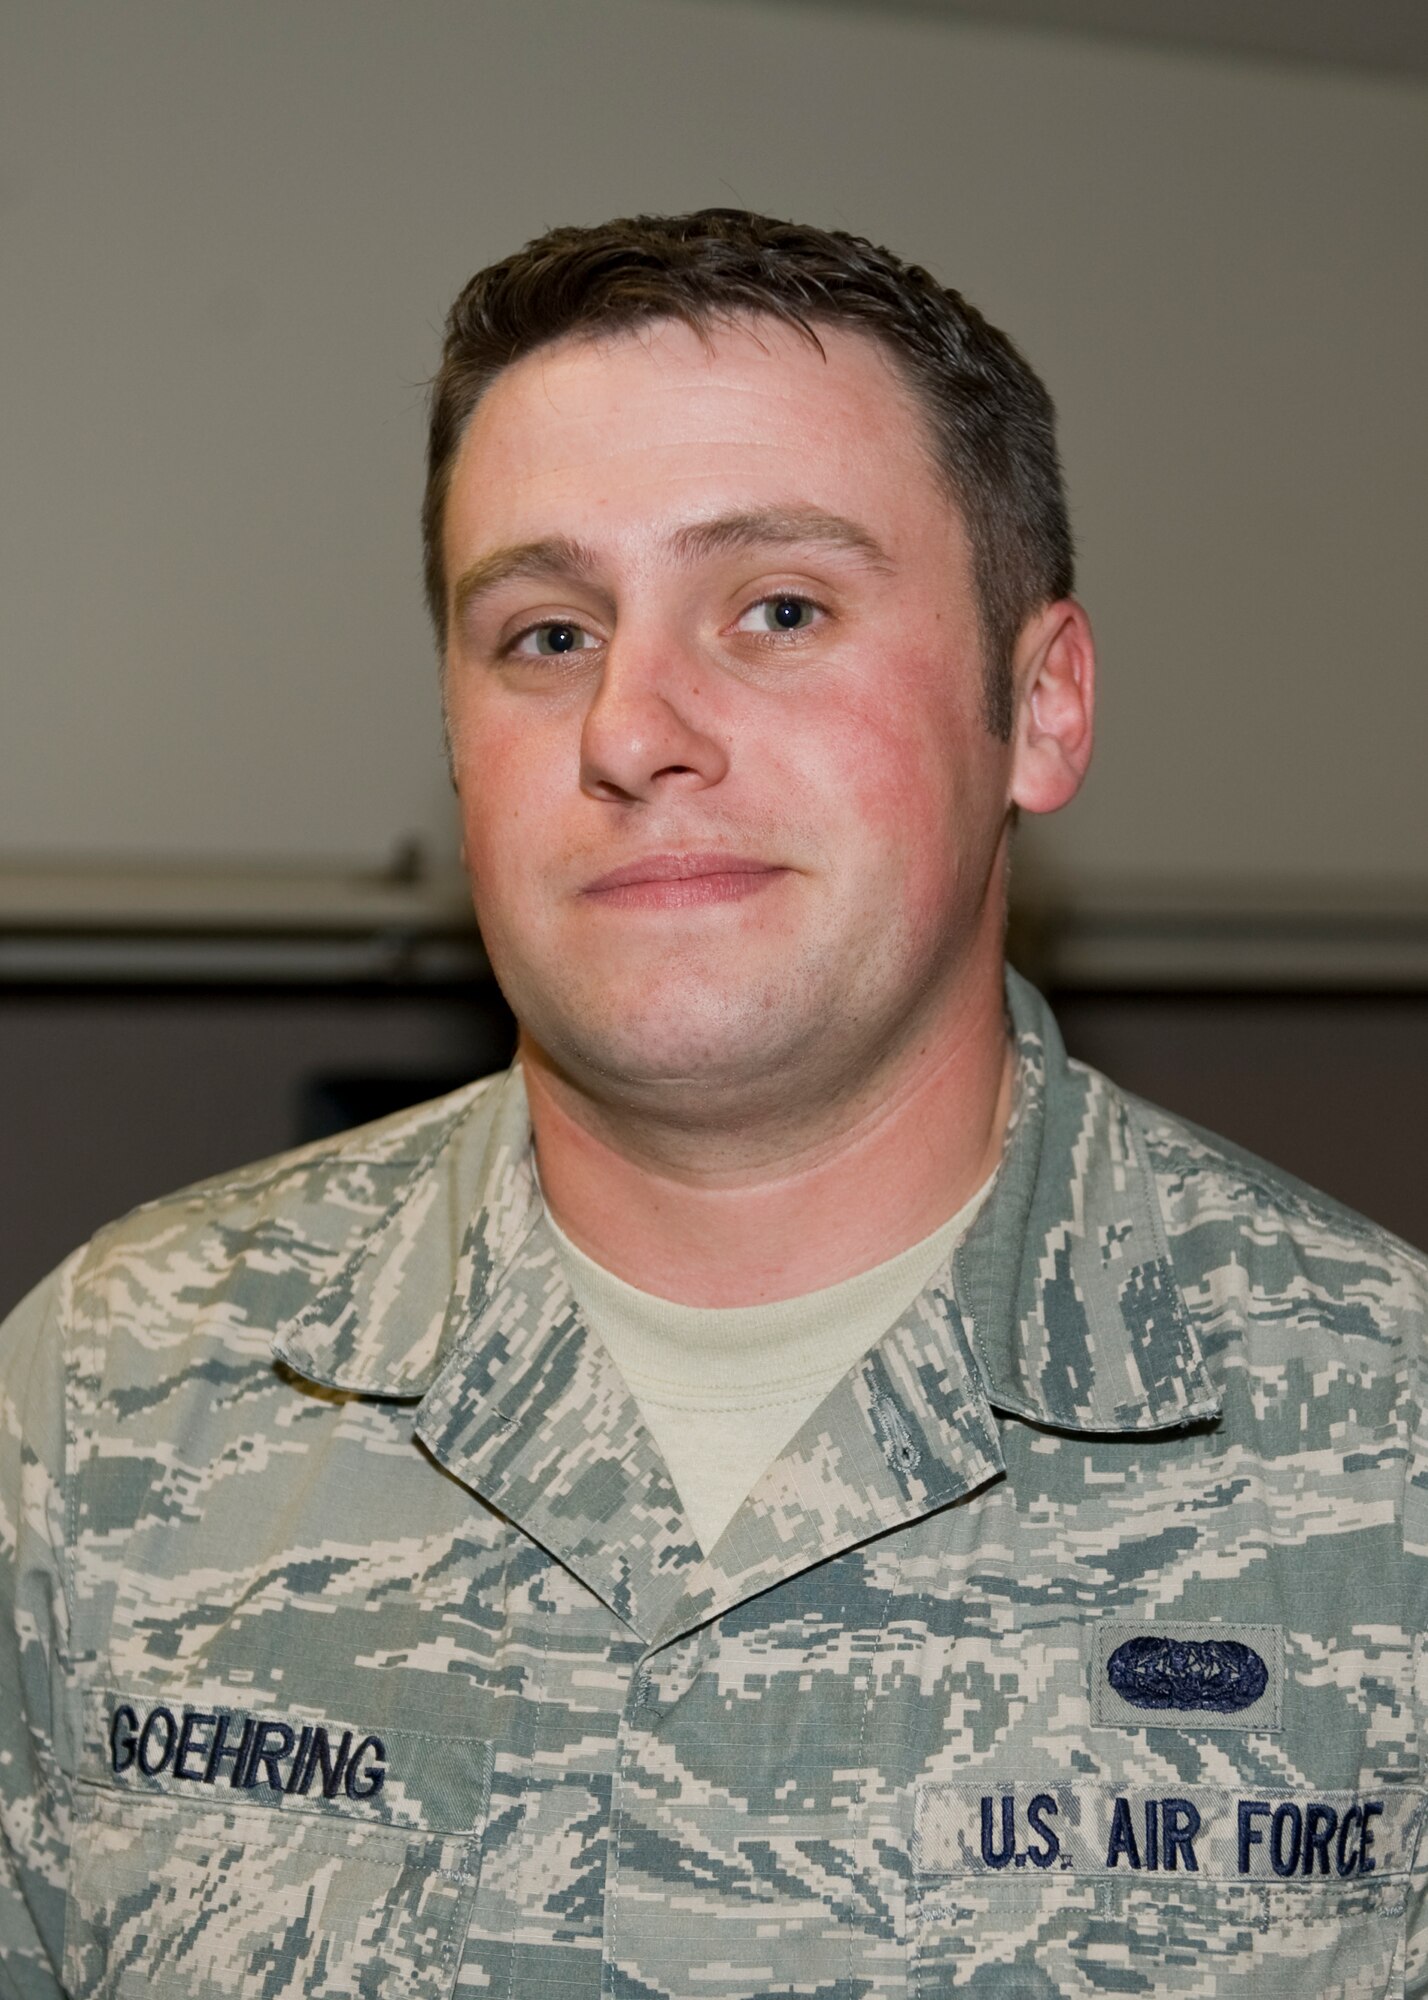 "Considering my wife is deployed right now, probably a gallon of ben and jerry’s ice cream and a sappy love movie to cry to." - Senior Airman Mathew Goehring, 7th Communications Squadron